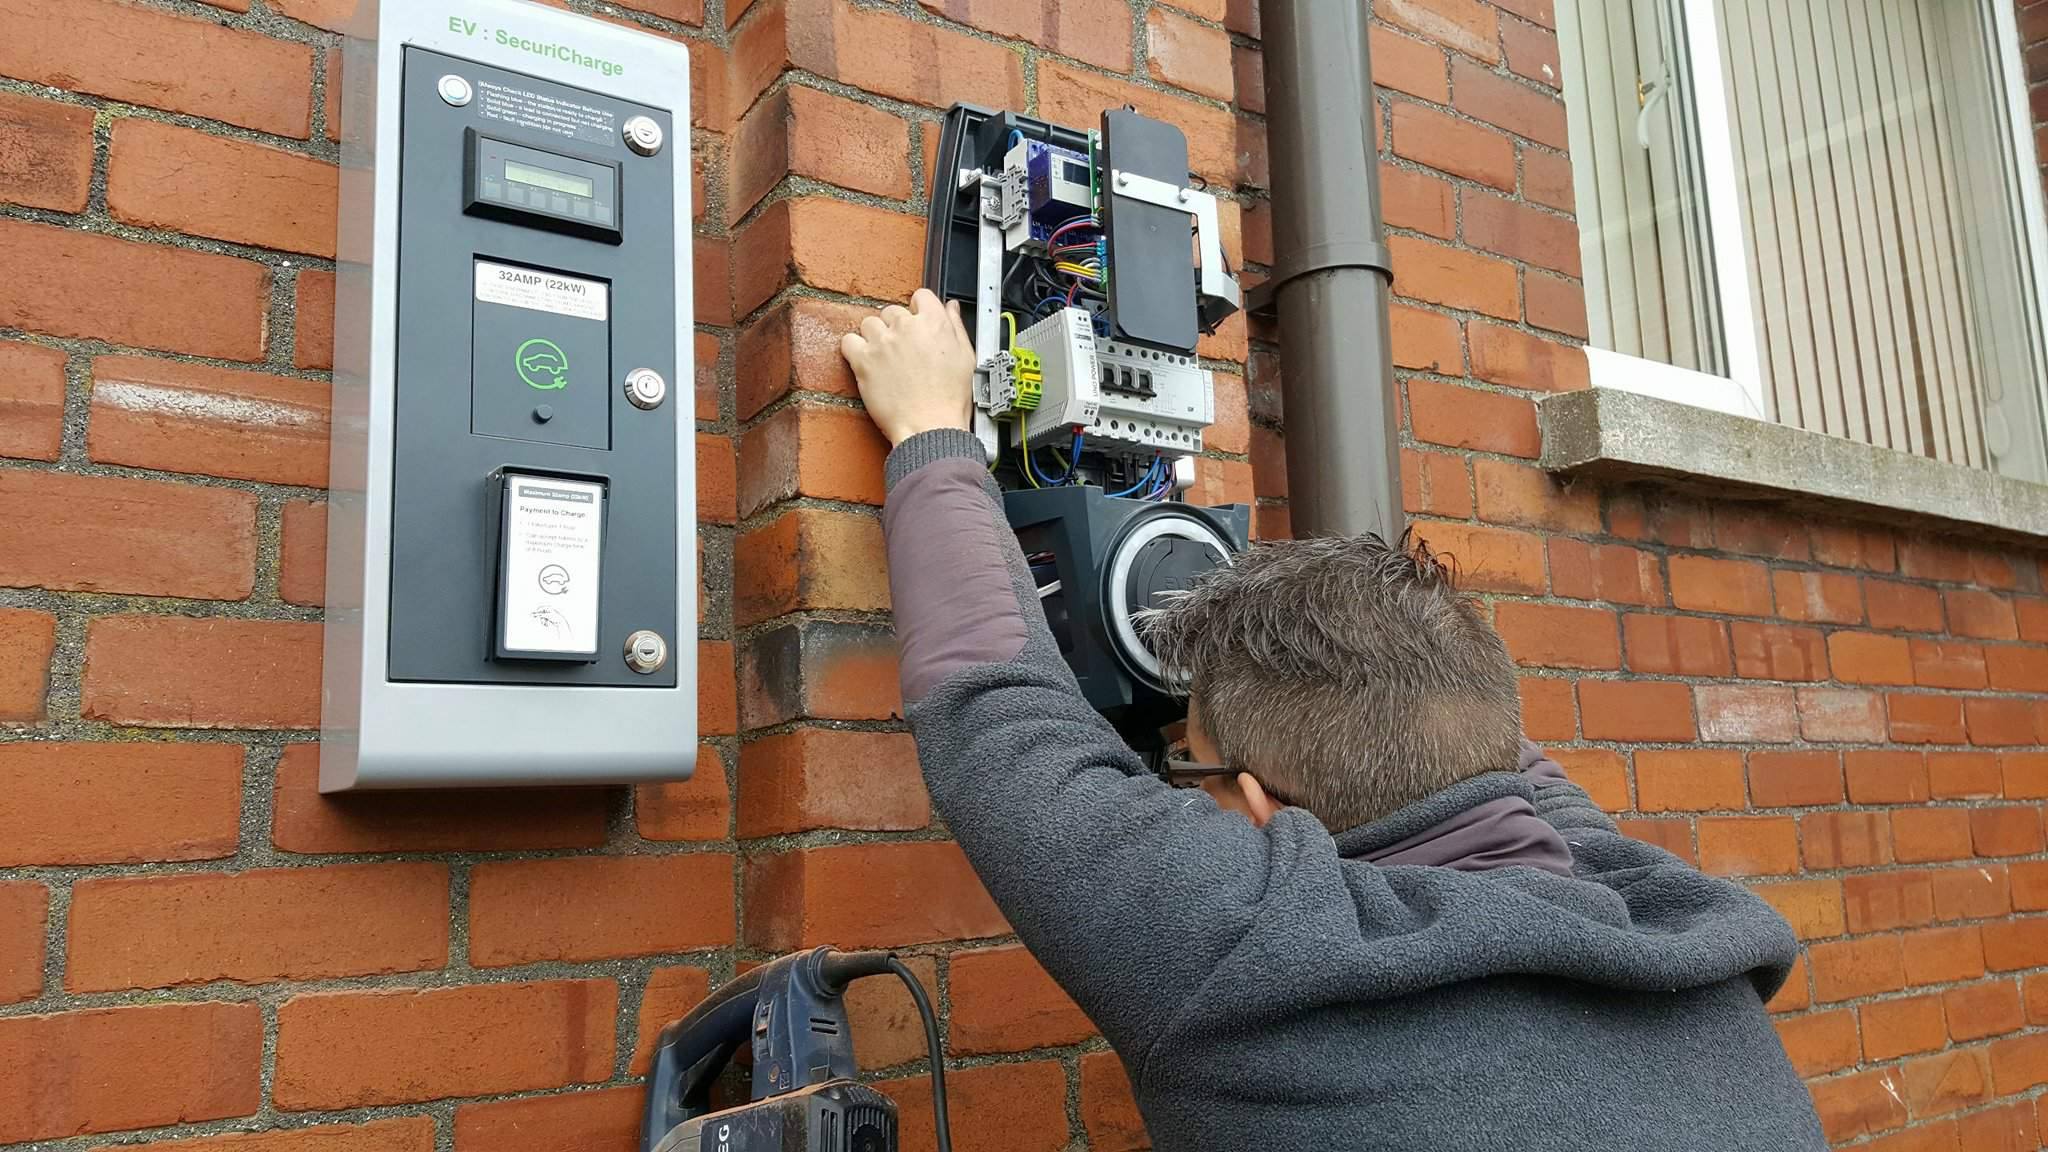 Installing the second EVCP at Pandy Village Hall, Abergavenny